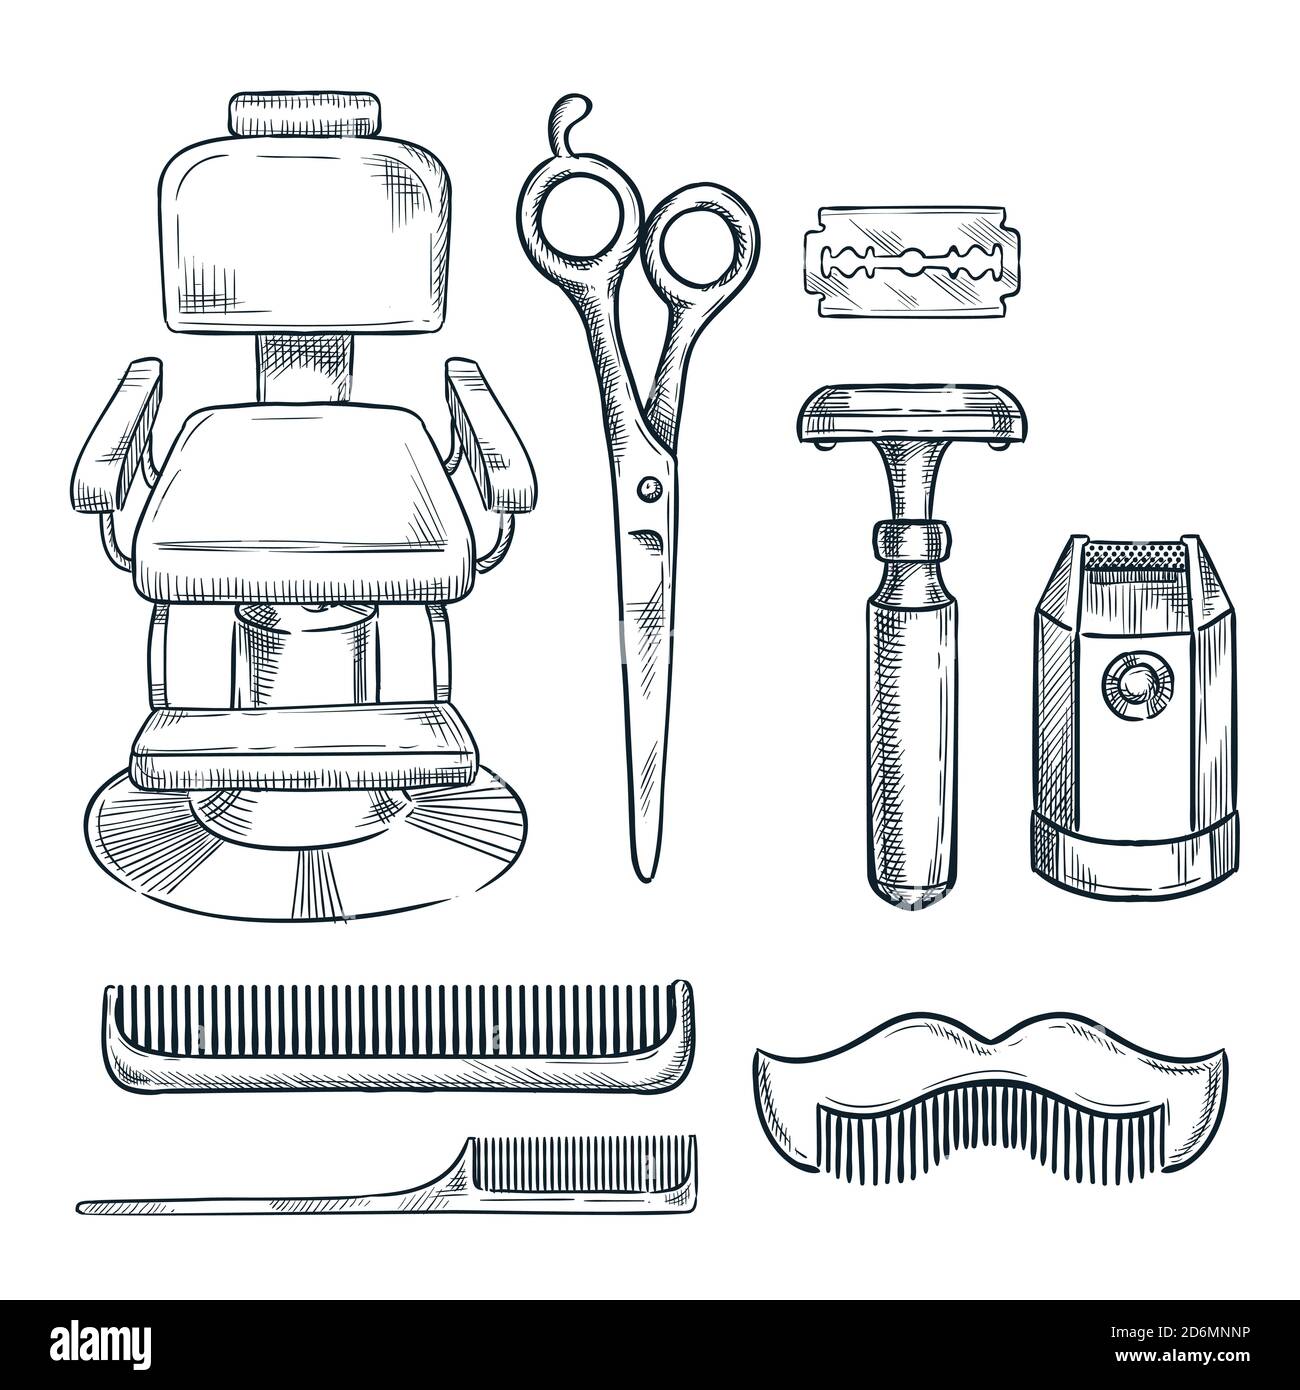 Barbershop vintage tools and equipment vector sketch illustration. Hand  drawn icons and design elements for mens barber shop or salon Stock Vector  Image & Art - Alamy